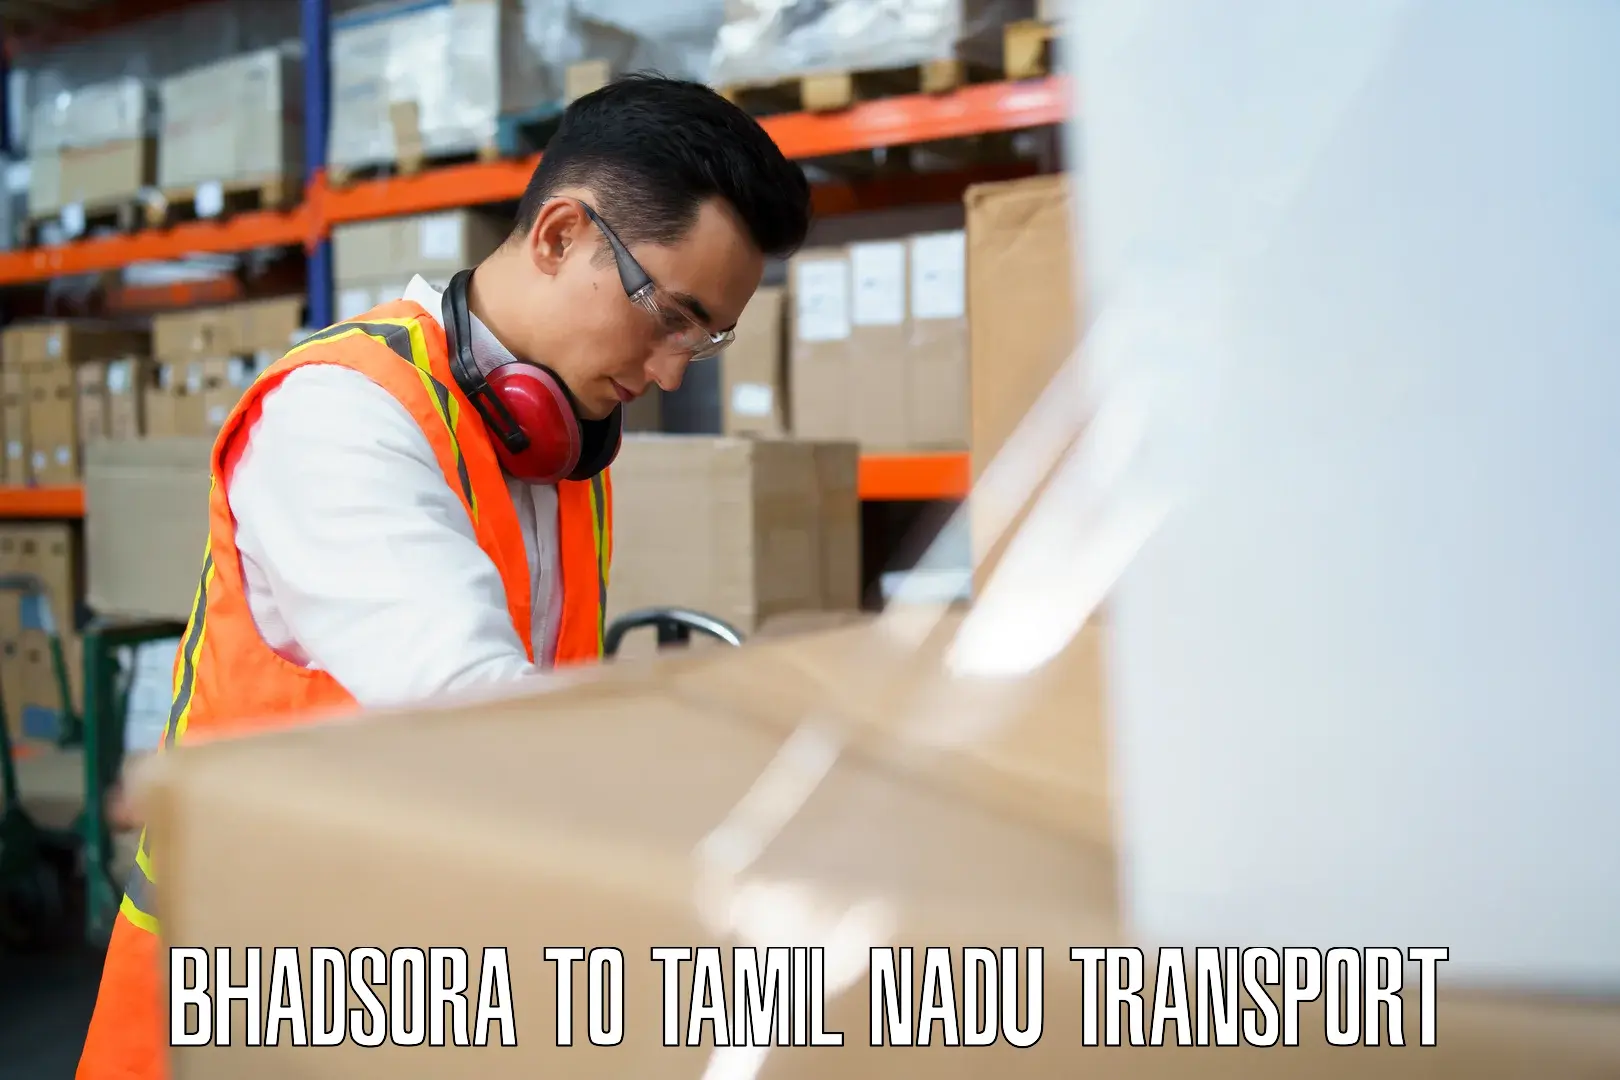 Goods delivery service Bhadsora to Tiruchi